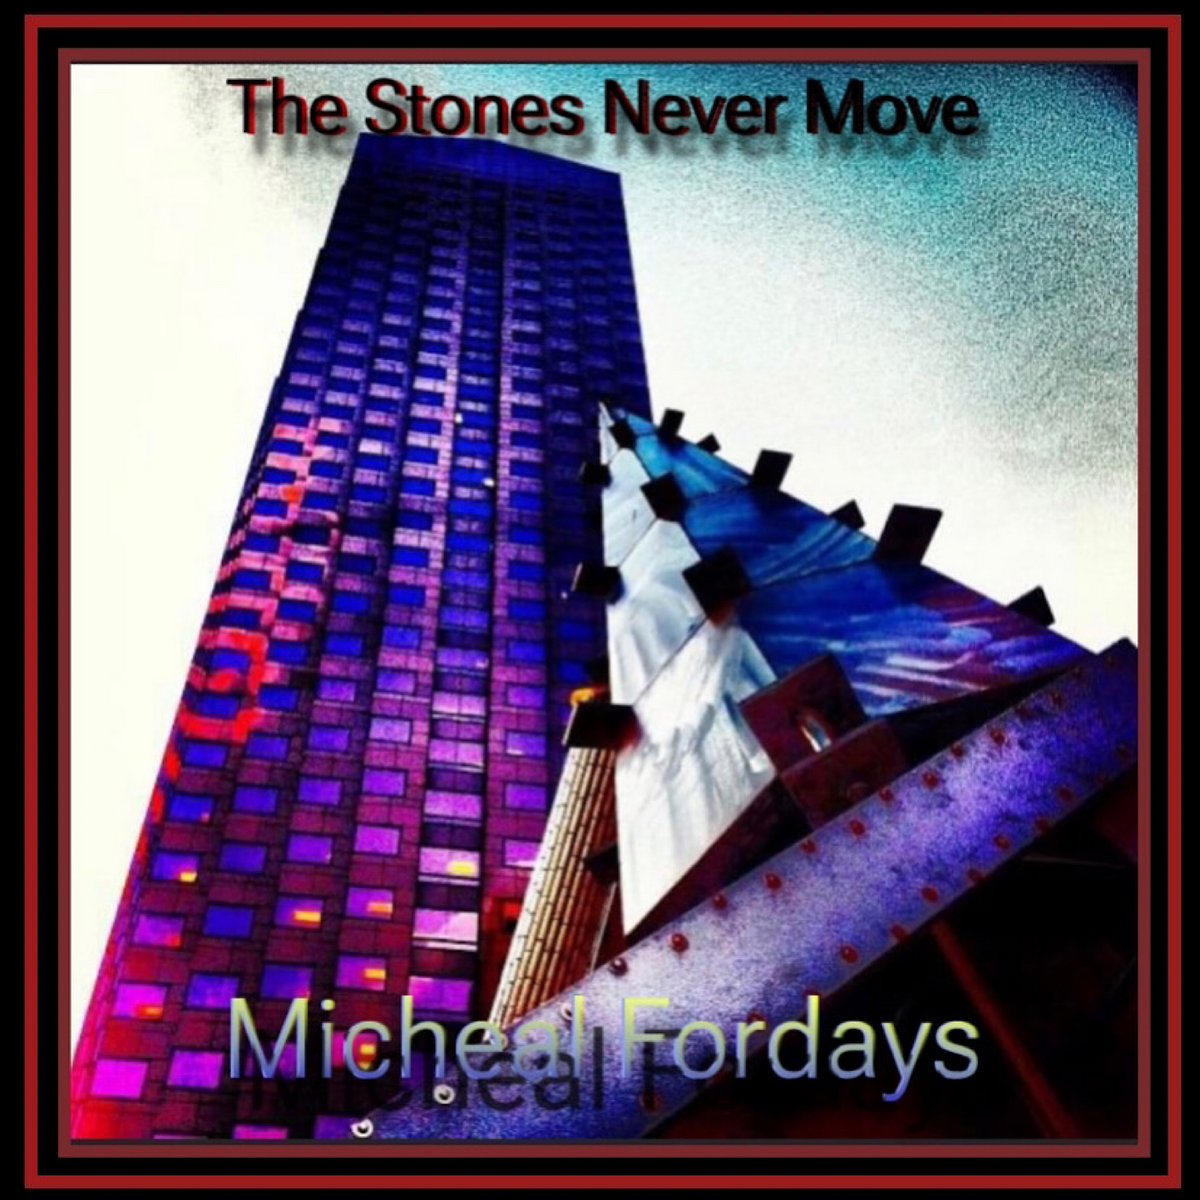 Micheal Fordays #The Stones Never Move" artwork